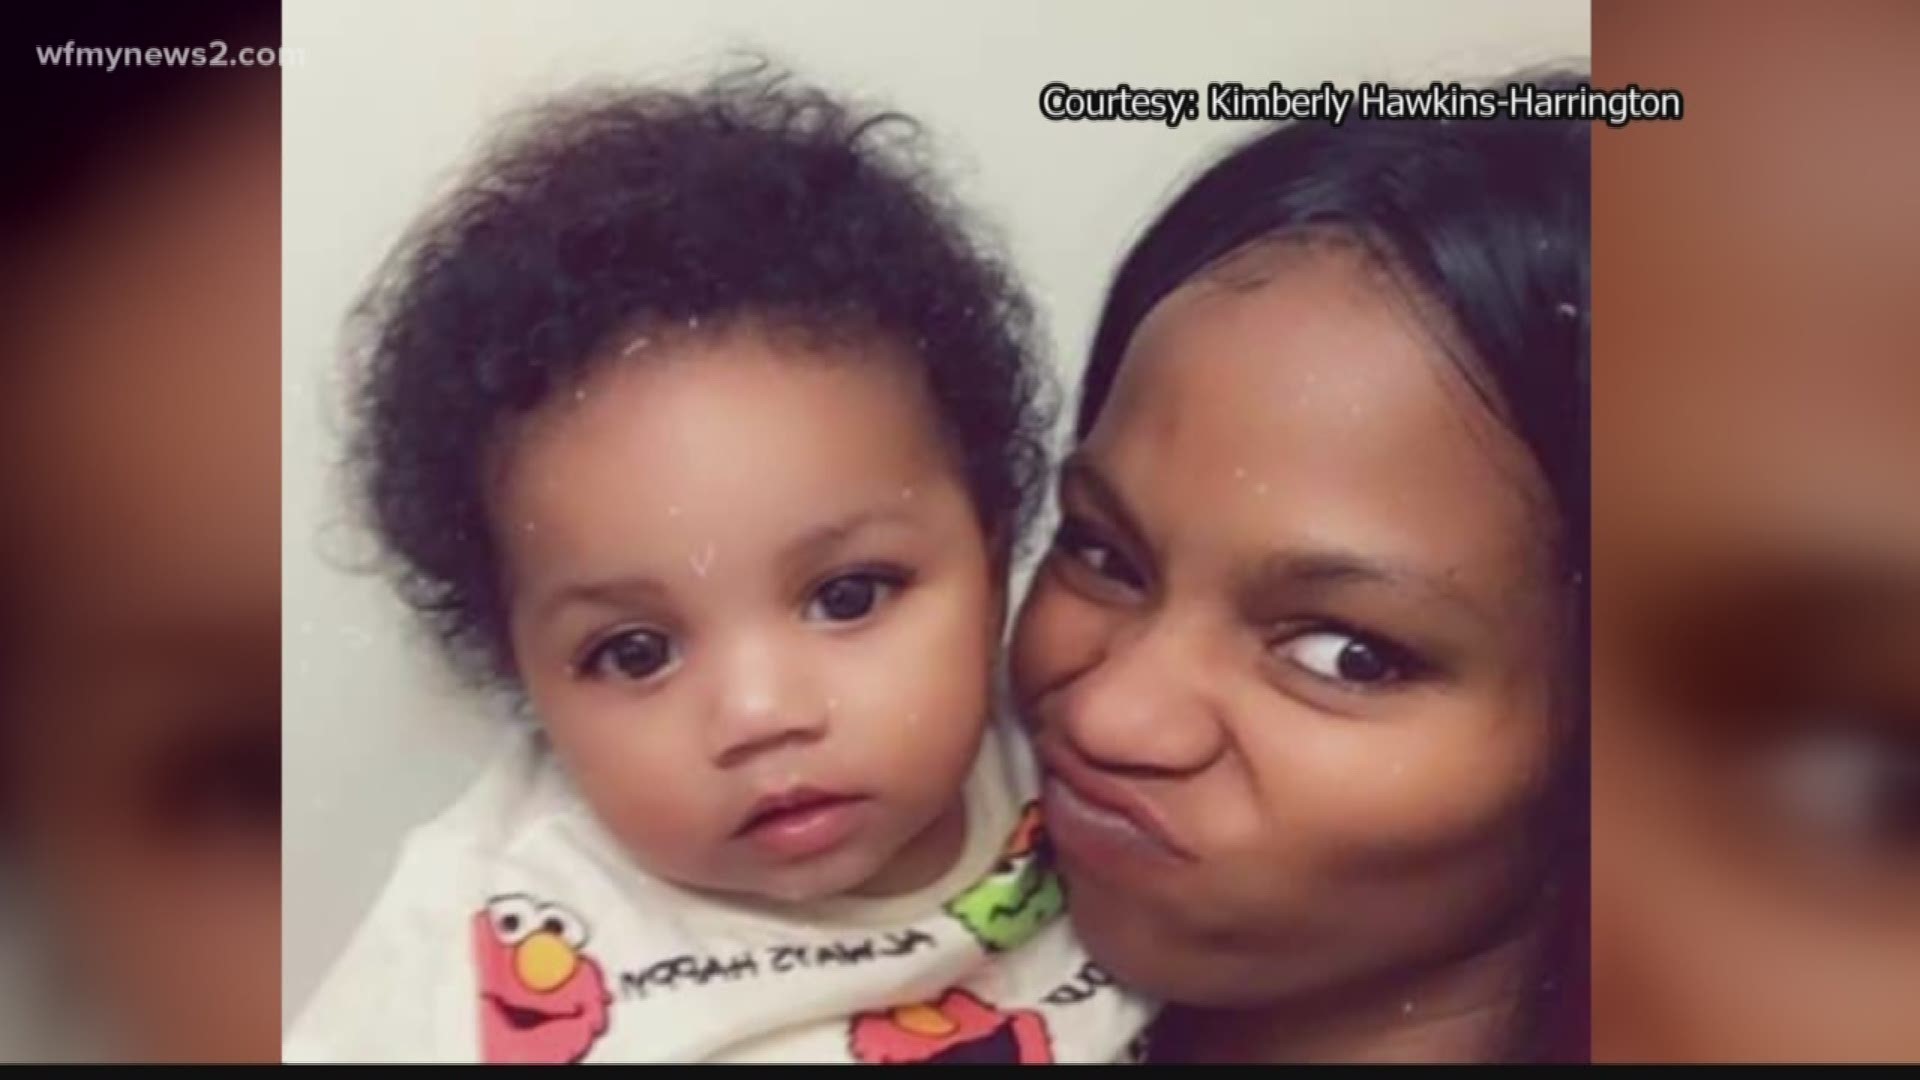 25-year-old Desiree Hall was a mother to five kids, between the ages of 1 and 10.